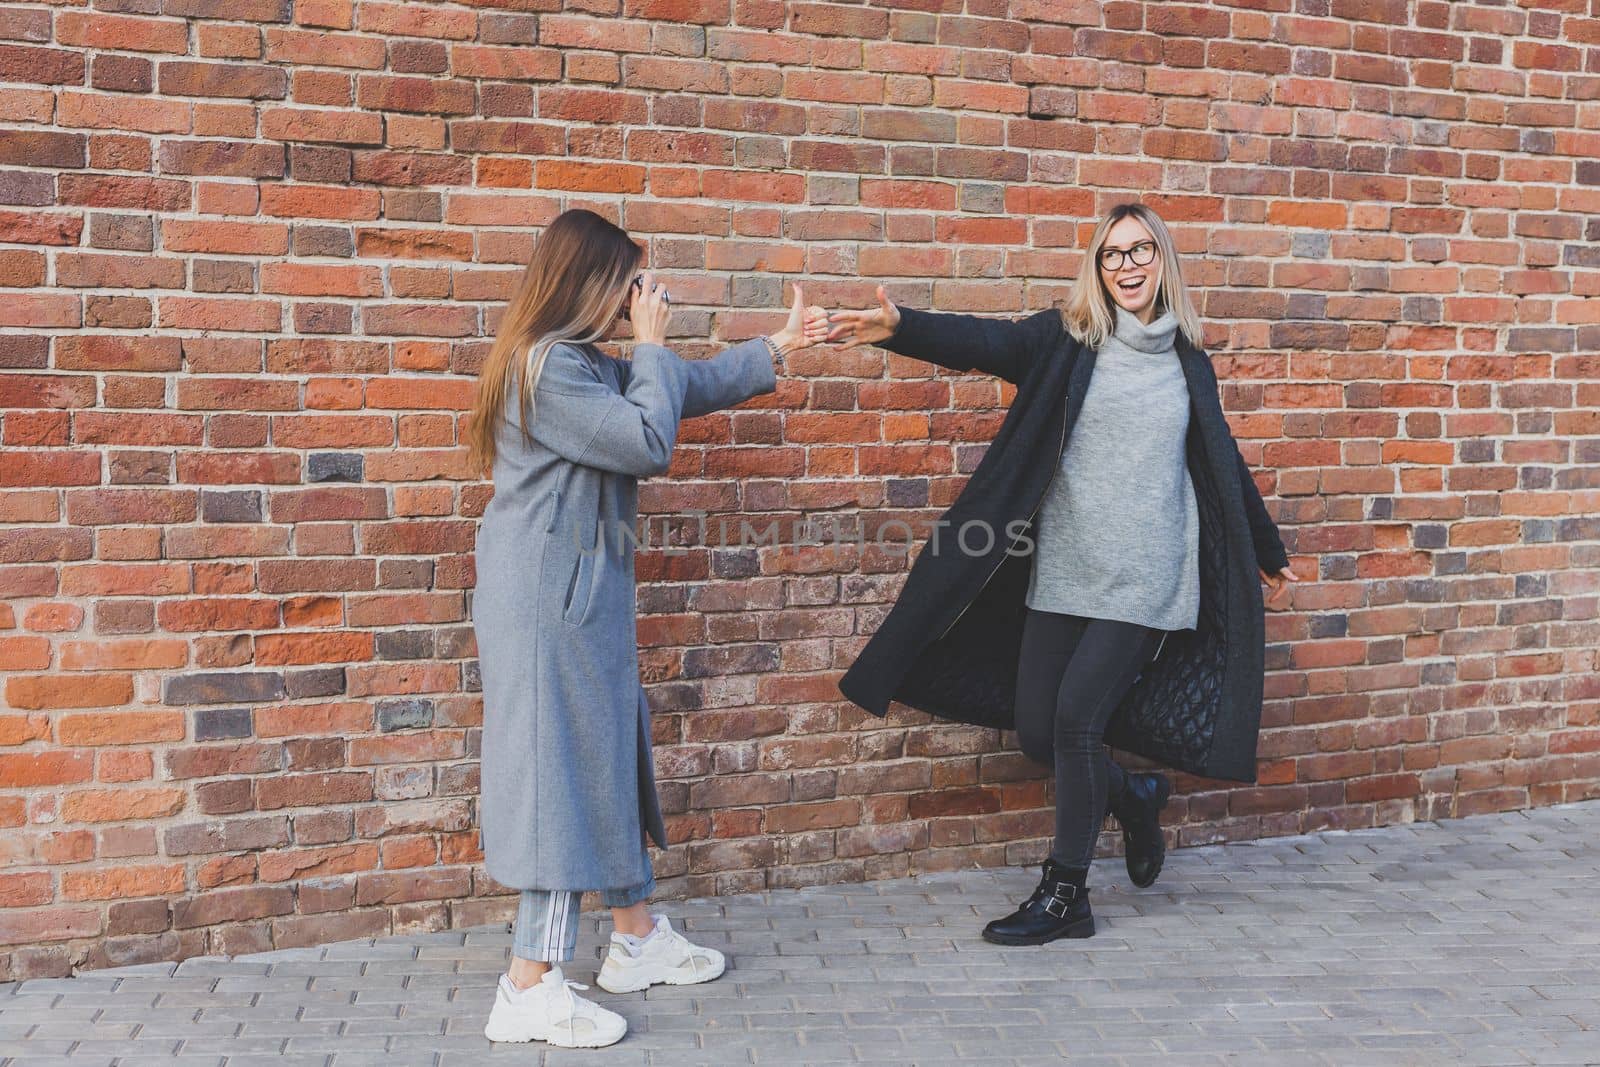 Girl takes picture of her female friend in front of brick wall in urban street - photographer and youth urban lifestyle concept by Satura86